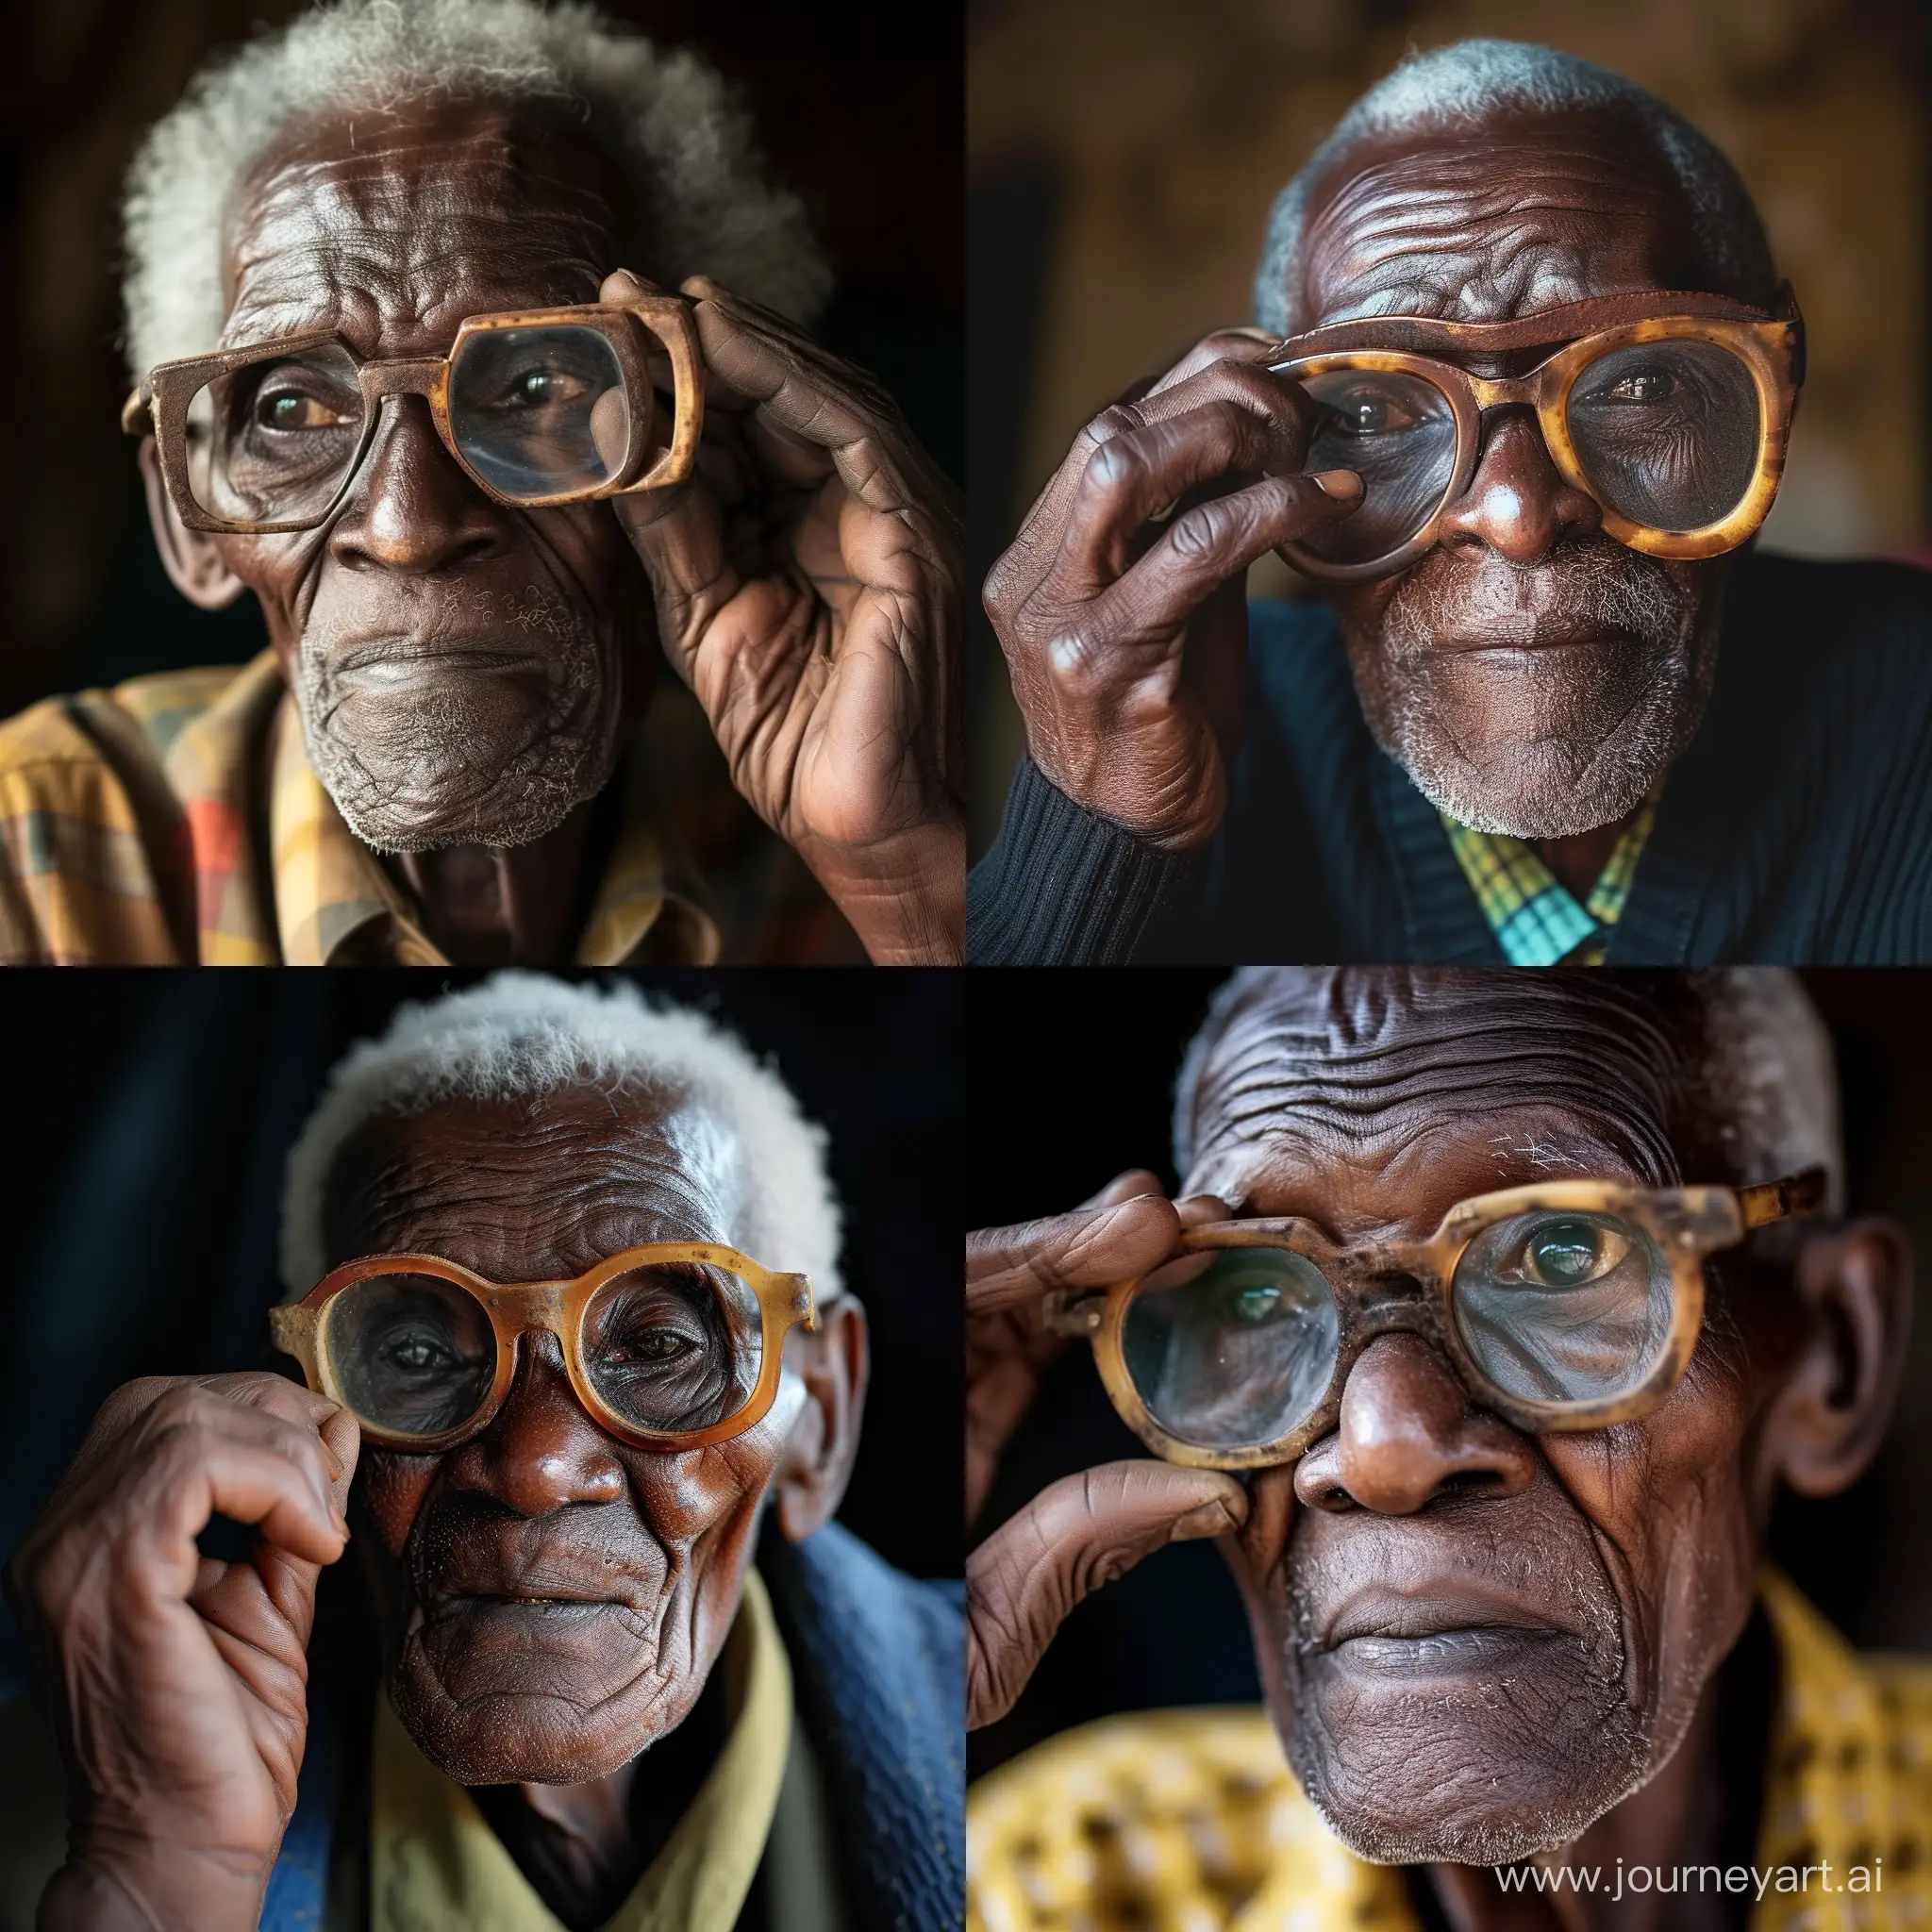 African old man wearing old slightly oversized glasses. He is adjusting the glasses with one hand